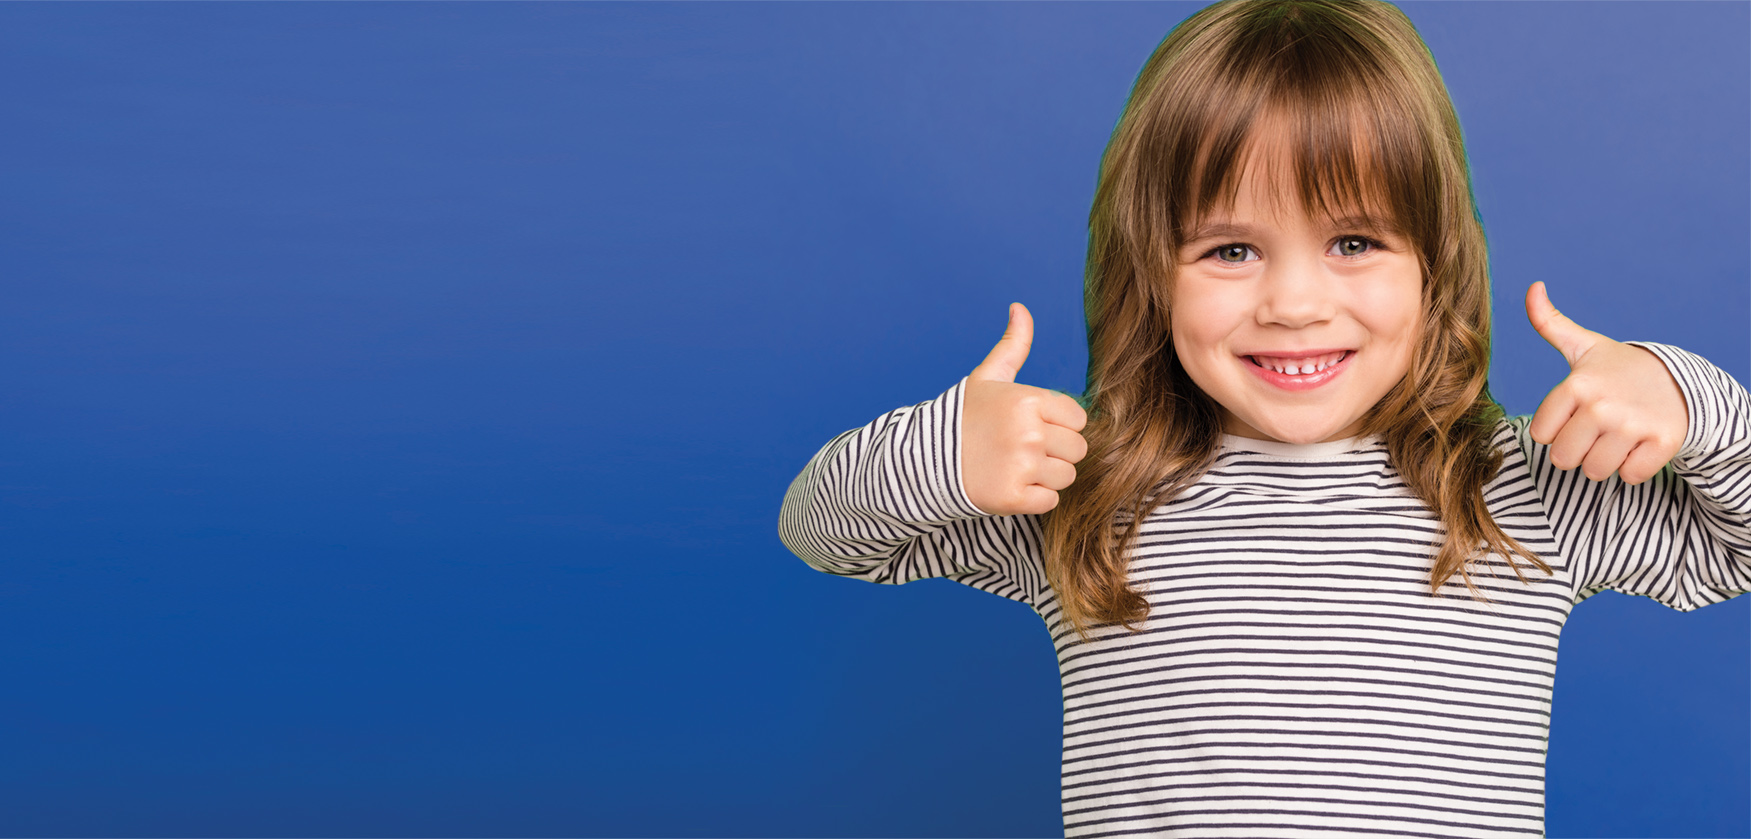 Little Girl with Thumbs Up